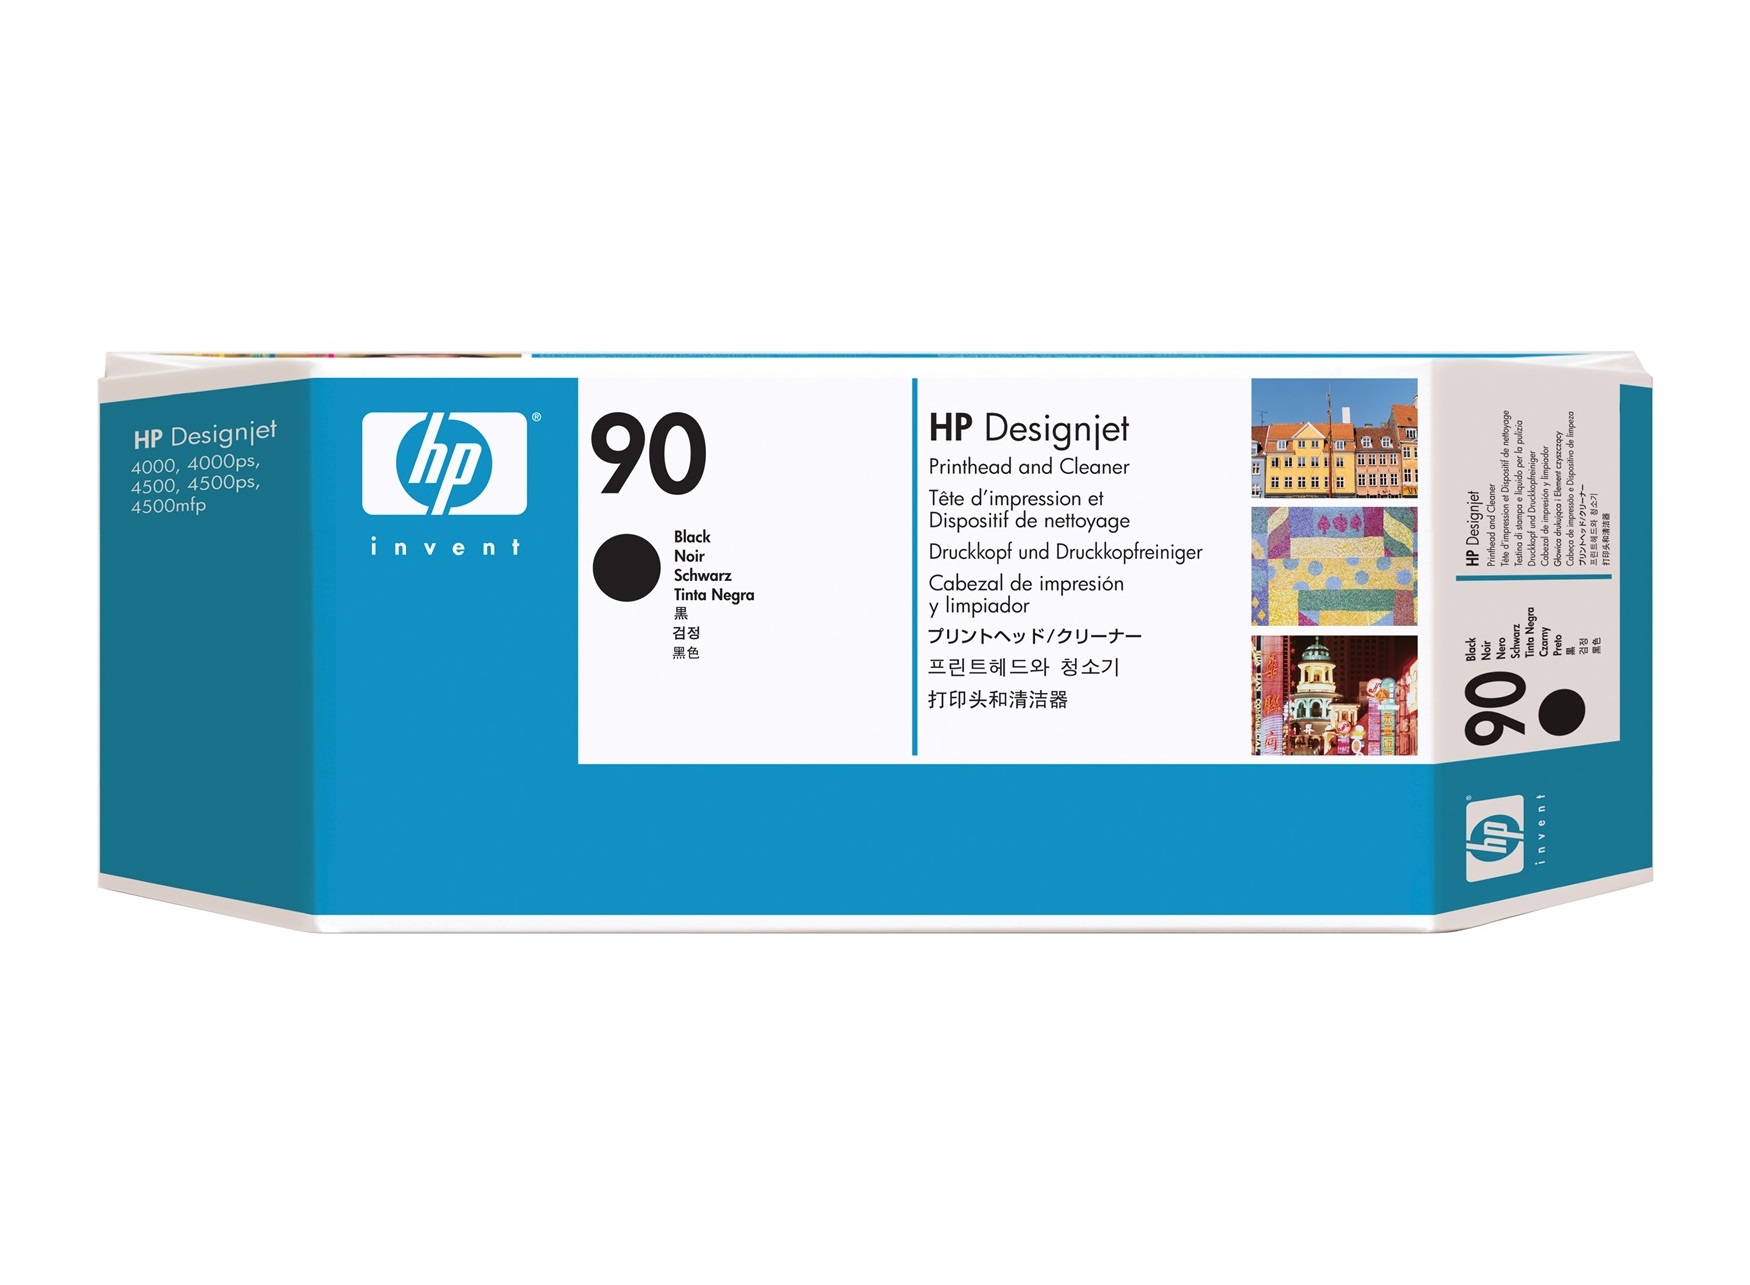 Related to HP 4000 CARTRIDGES: C5054A